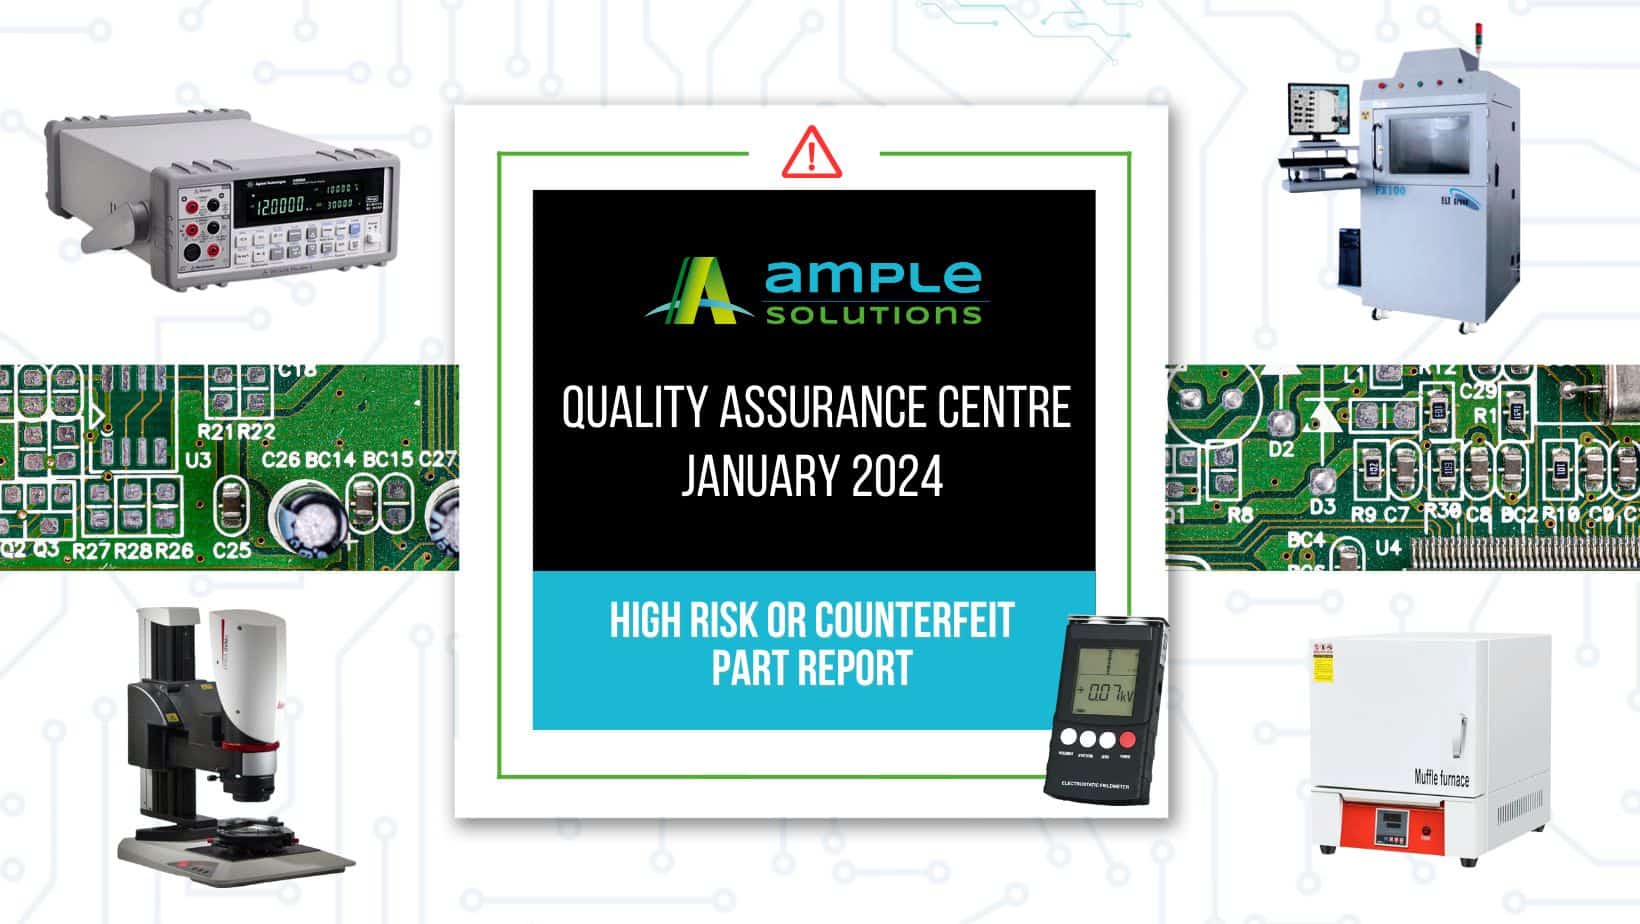 High-risk or Counterfeit Electronic Components: Ample Solutions Quality Assurance Centre January 2024 Report